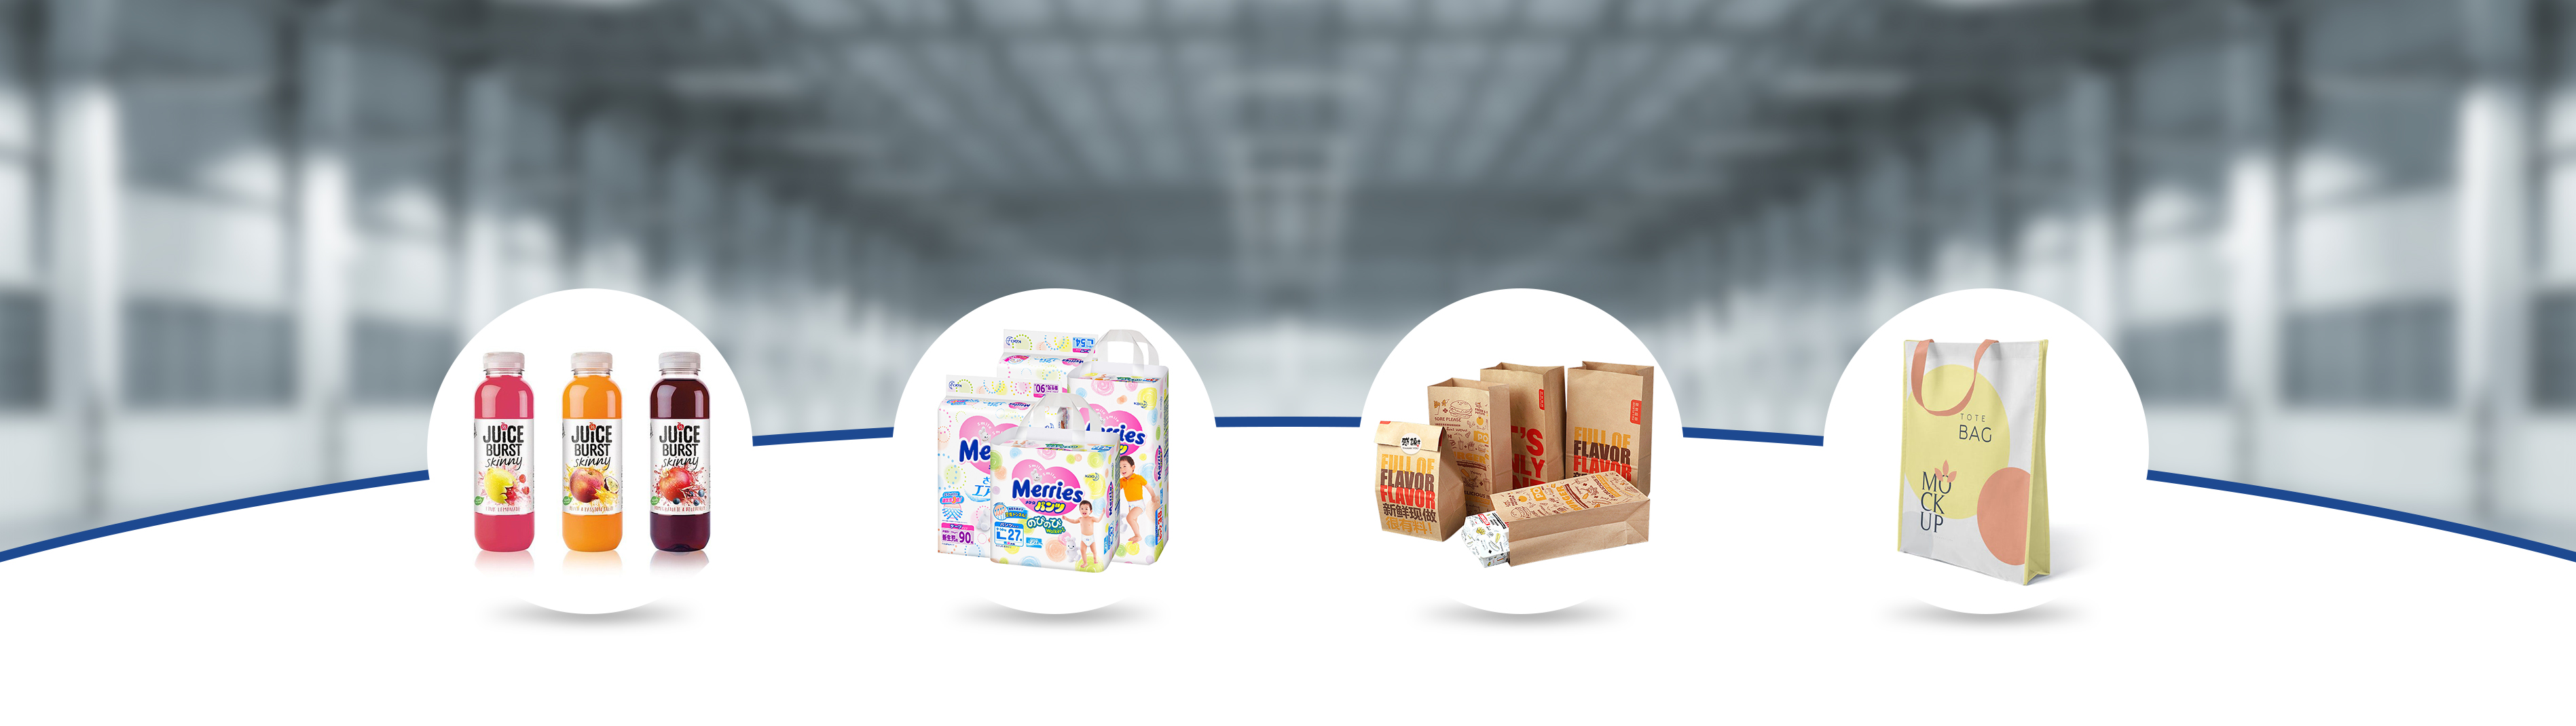 Fixed Competitive Price China Multicolors Stack Type Flexography Printing Machine Flexographic Printing Press Flexo Printing Machine UV Label Printing Press neDelam/Relam uye Die Cutting.